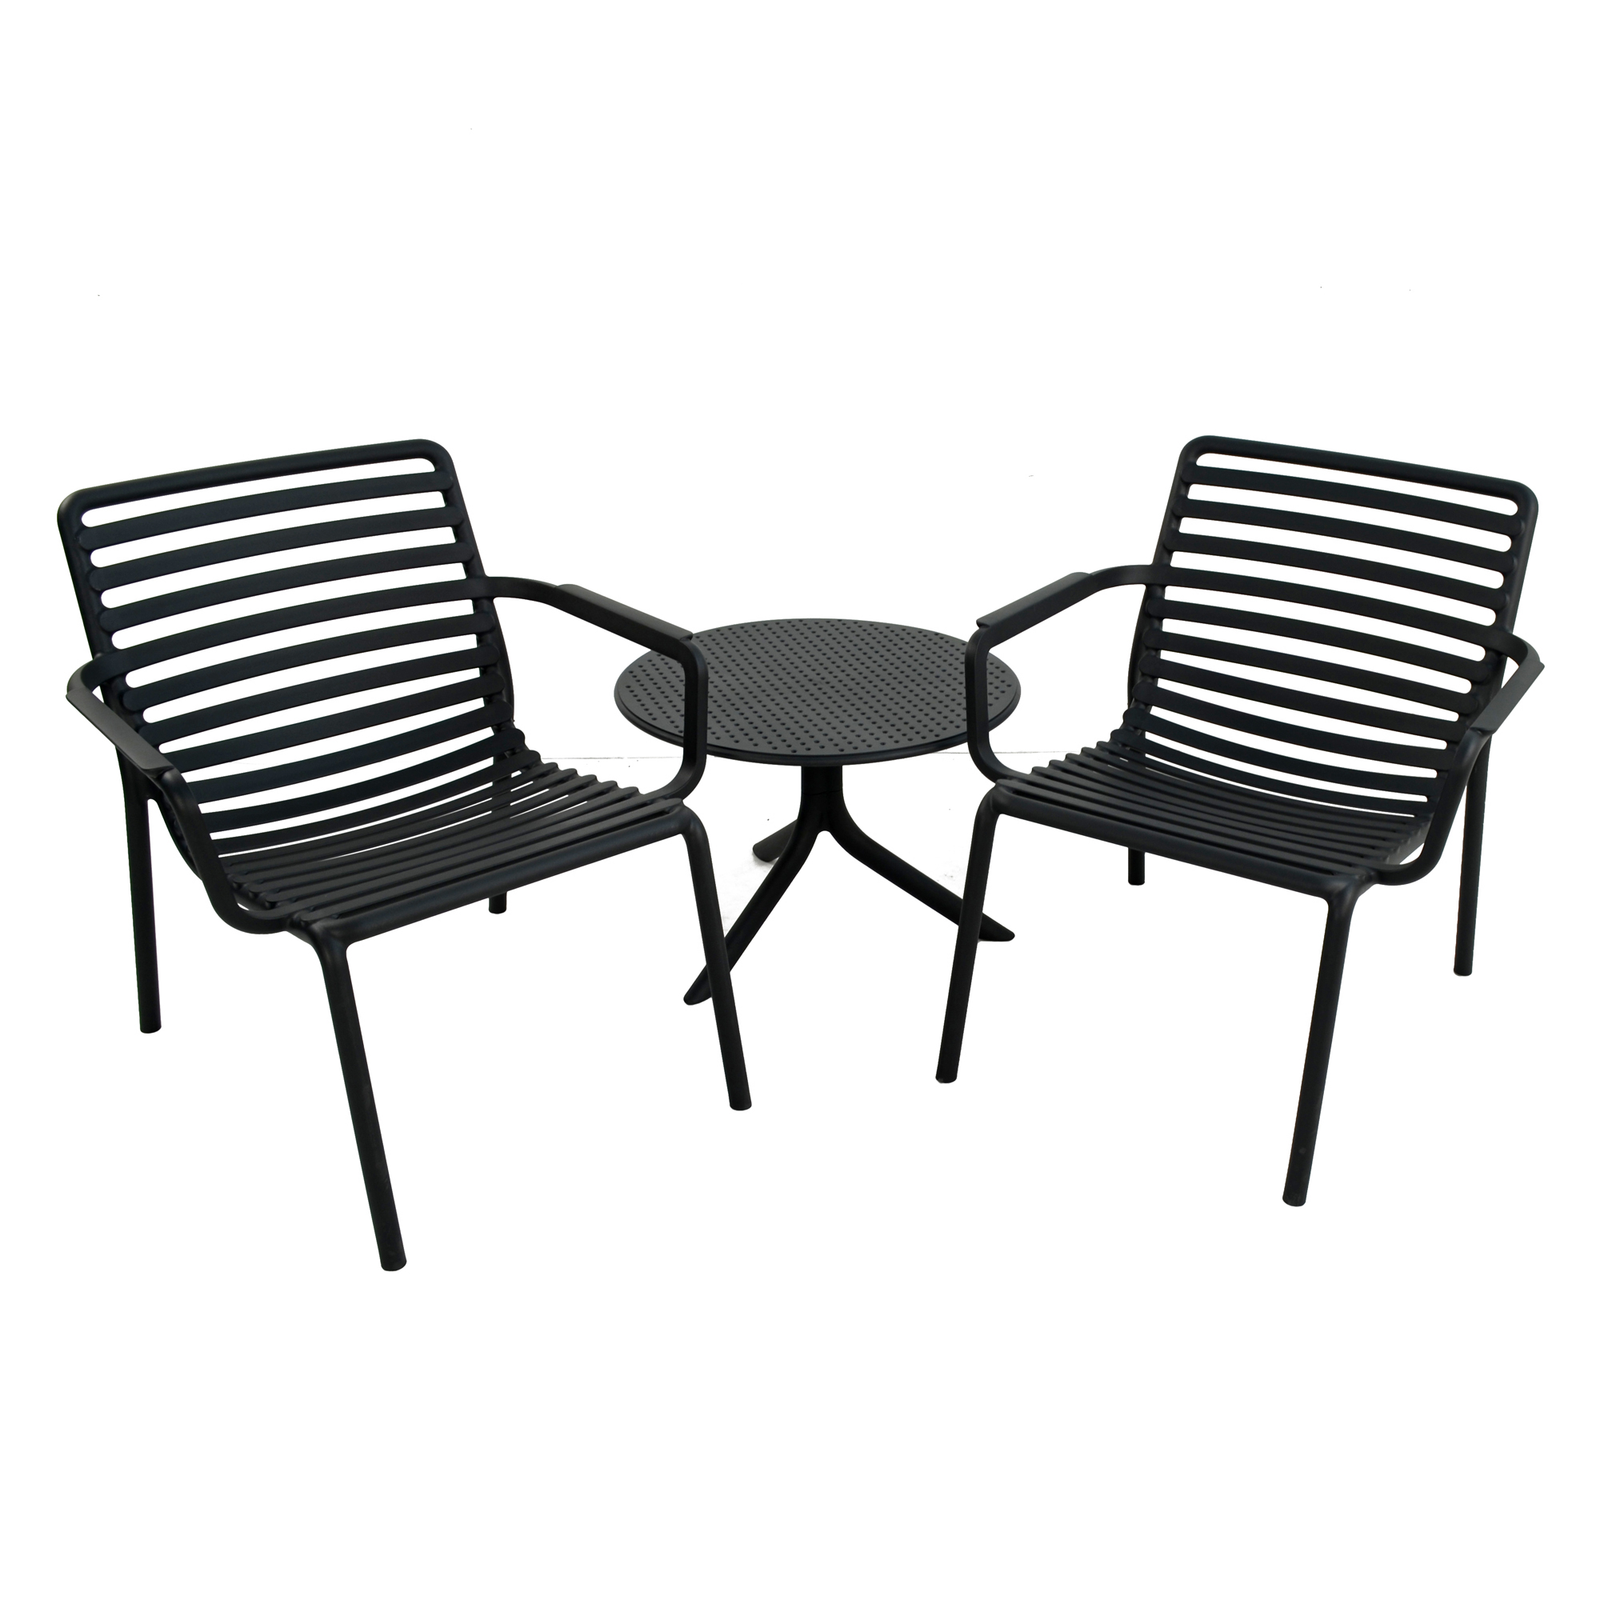 Nardi Step Low Garden Coffee Table with 2 Doga Relax Chair Set in Anthracite Grey Dining Sets Nardi   